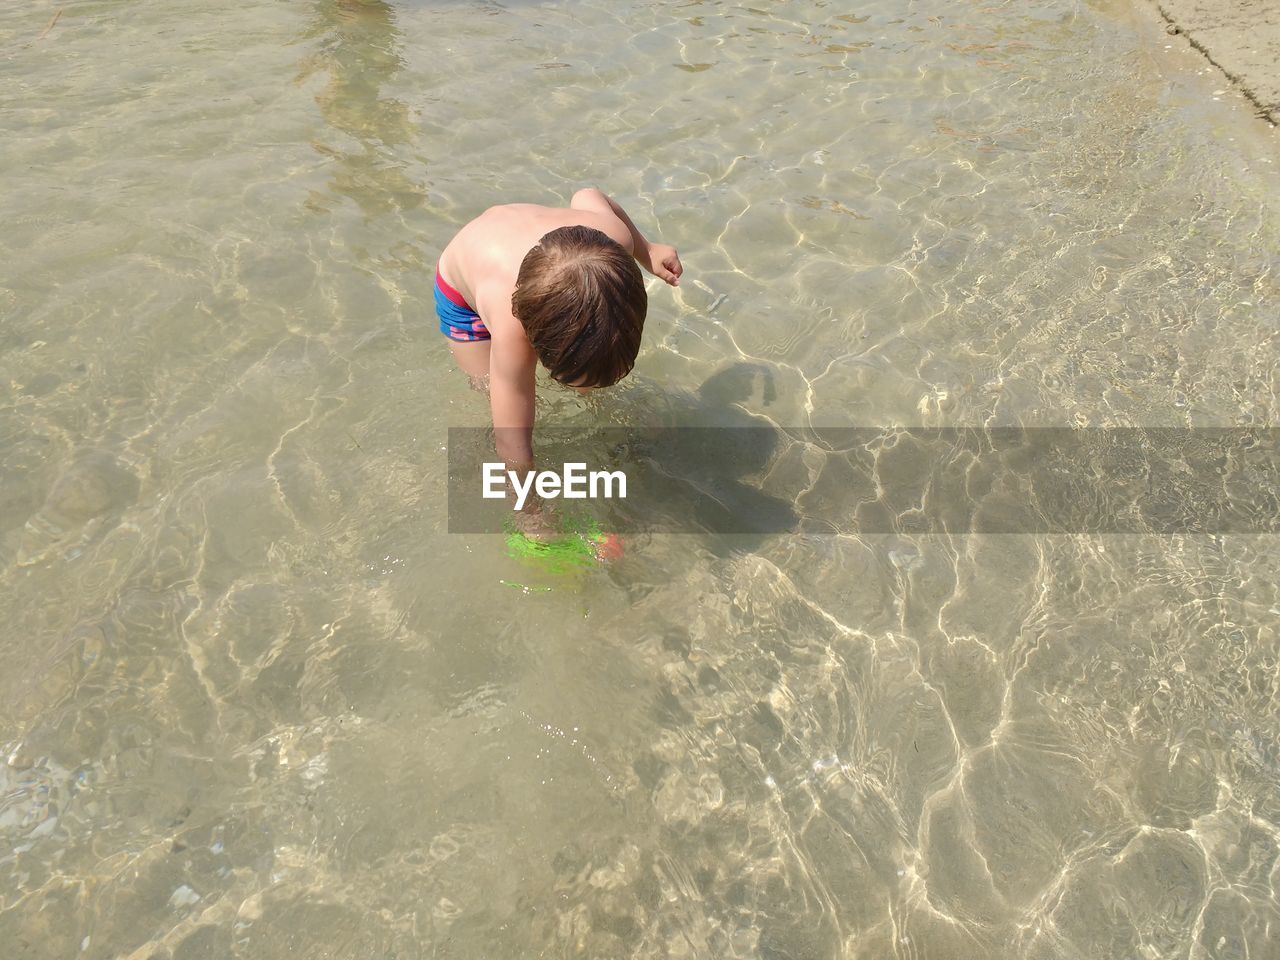 HIGH ANGLE VIEW OF BOY SWIMMING IN WATER